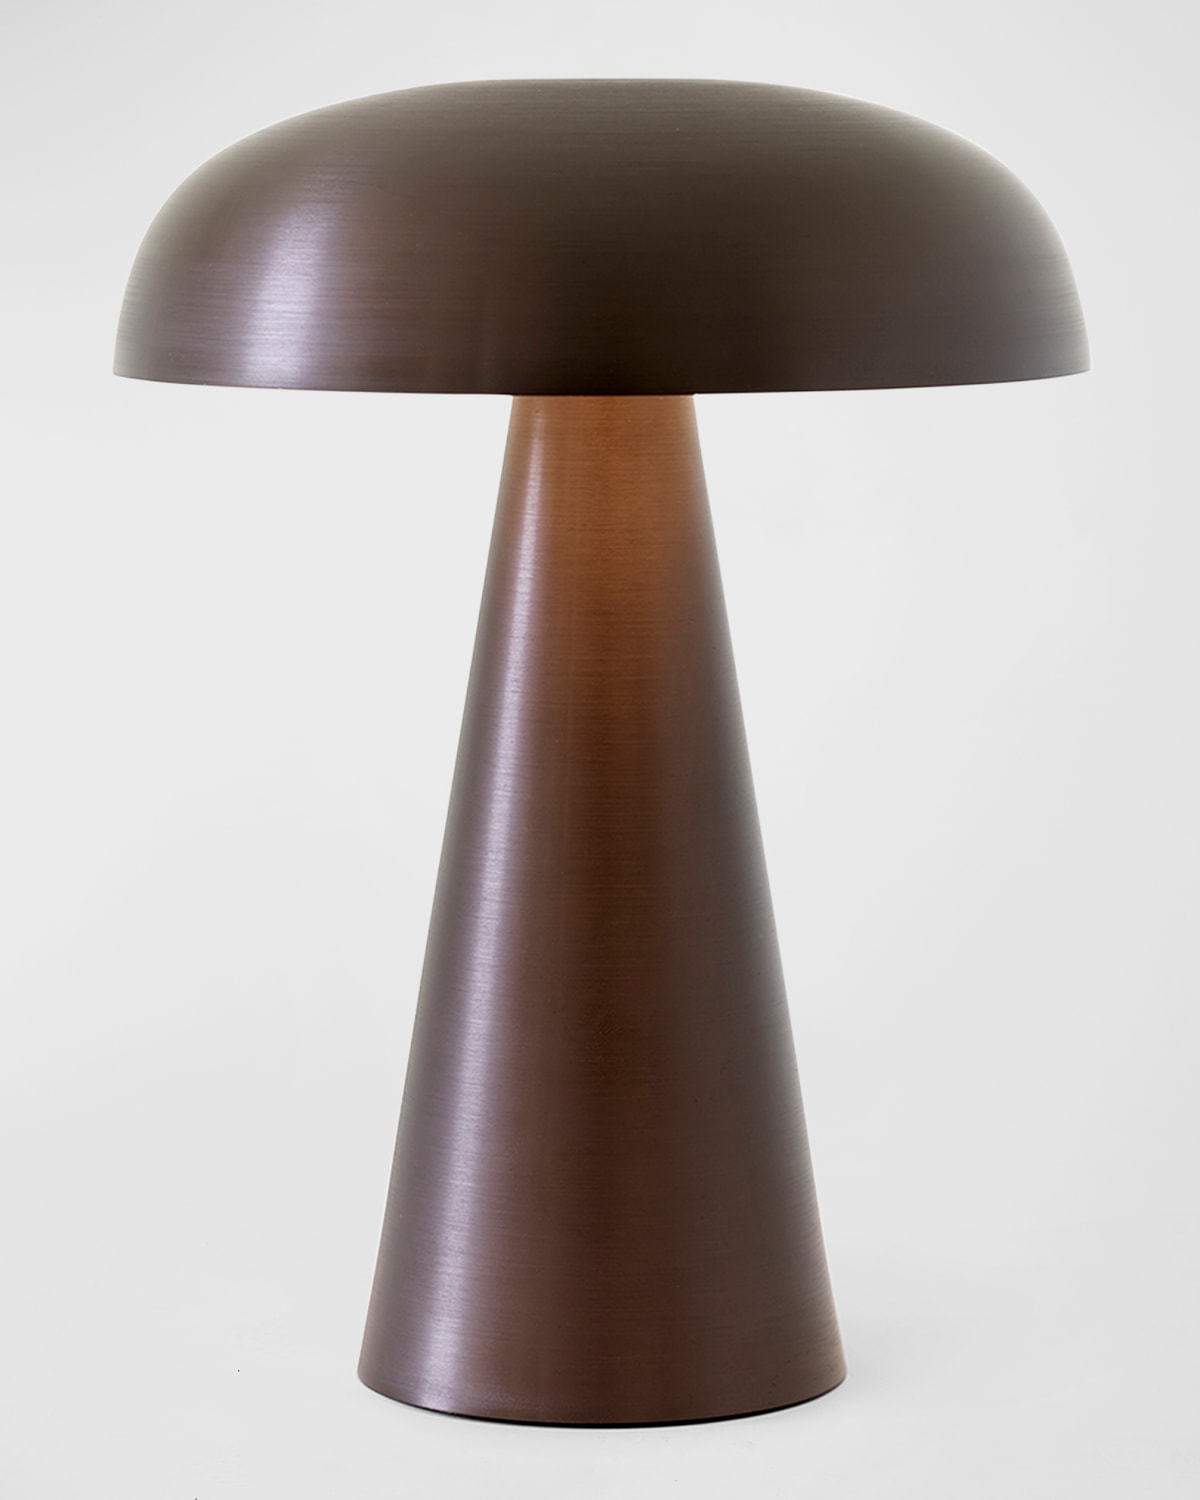 Tradition Como Portable Led Table Lamp In Brown